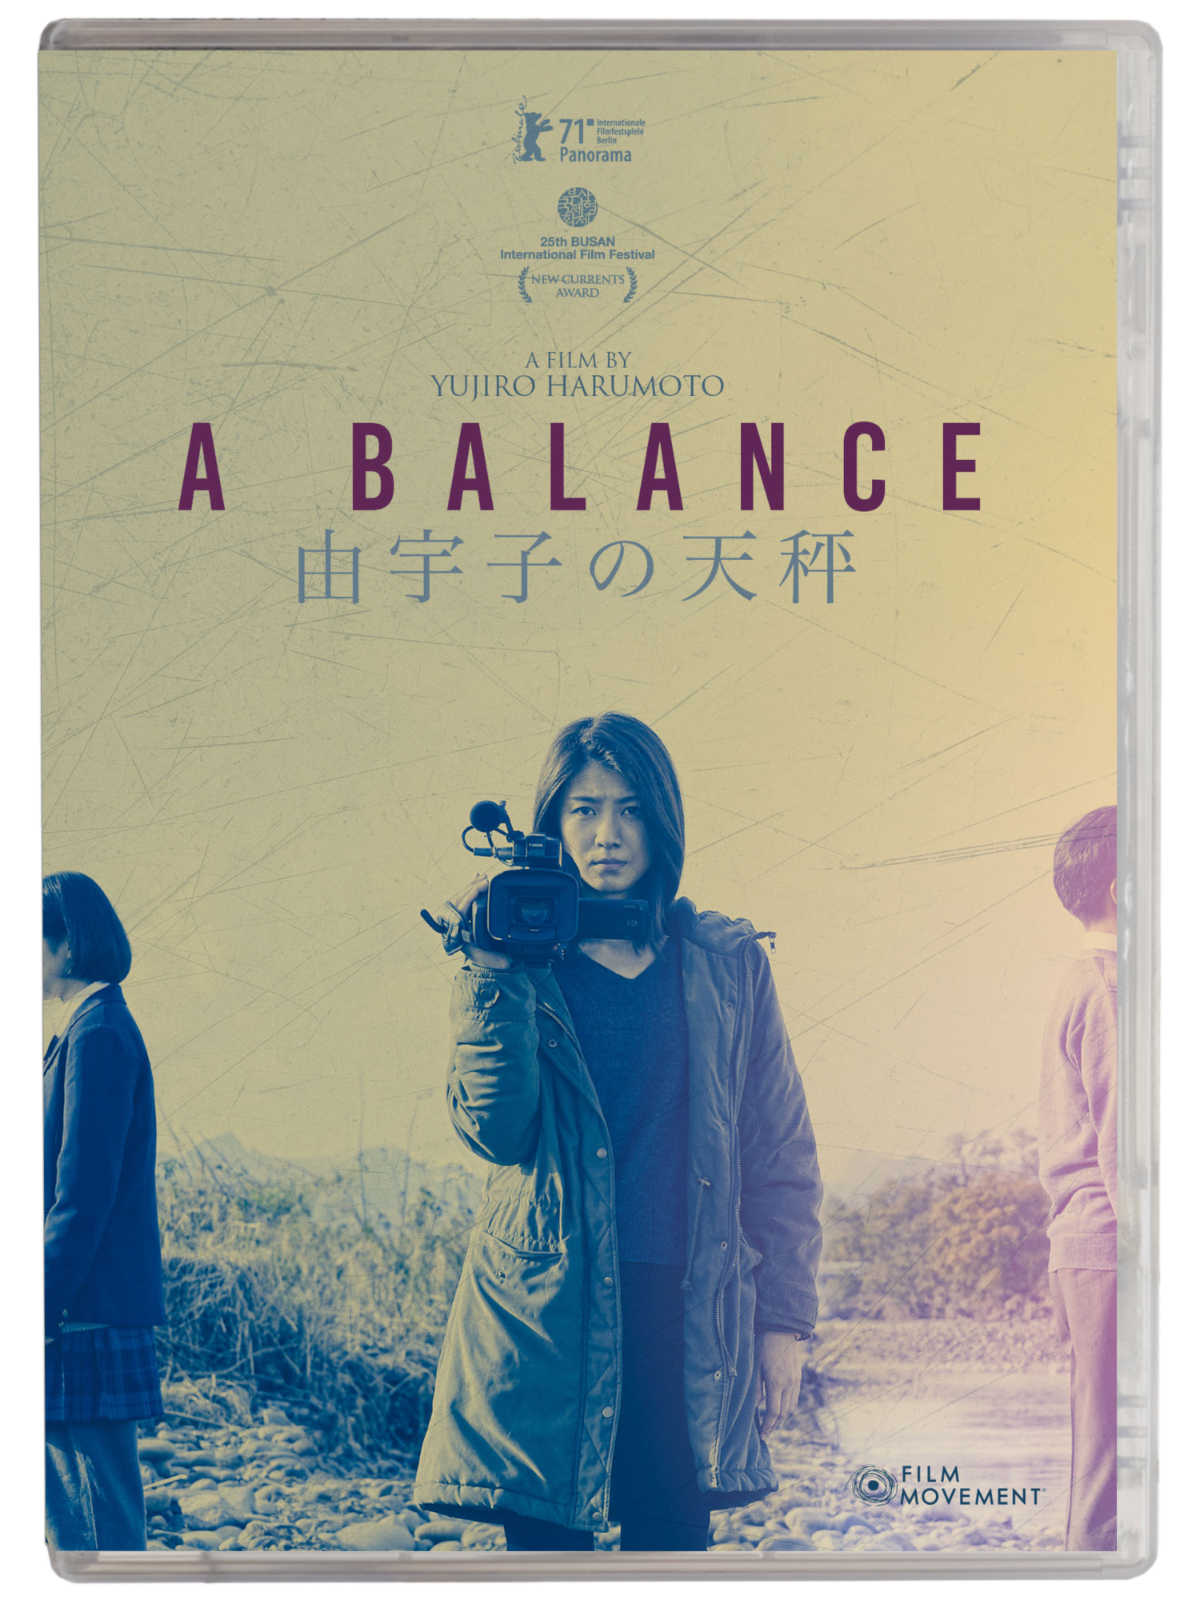 Uncover the layers of grief, deception, and moral dilemmas in the captivating Japanese film "A Balance."